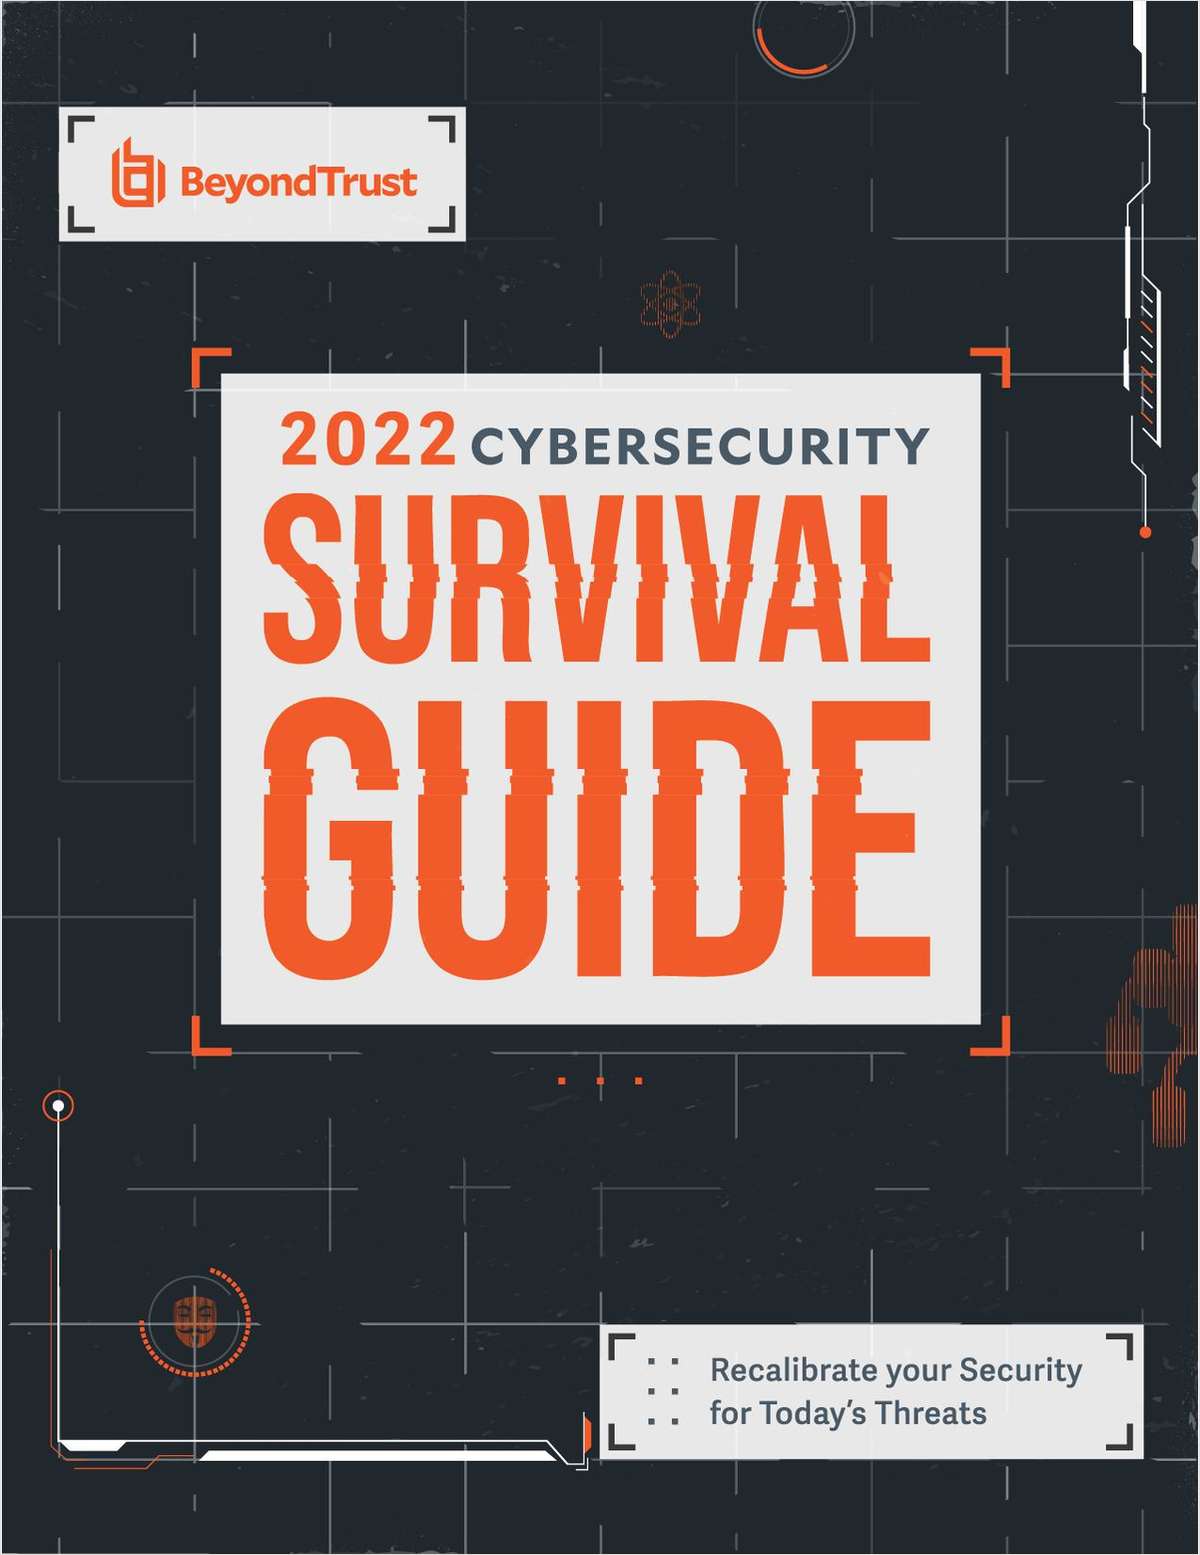 The 2022 Cybersecurity Survival Guide